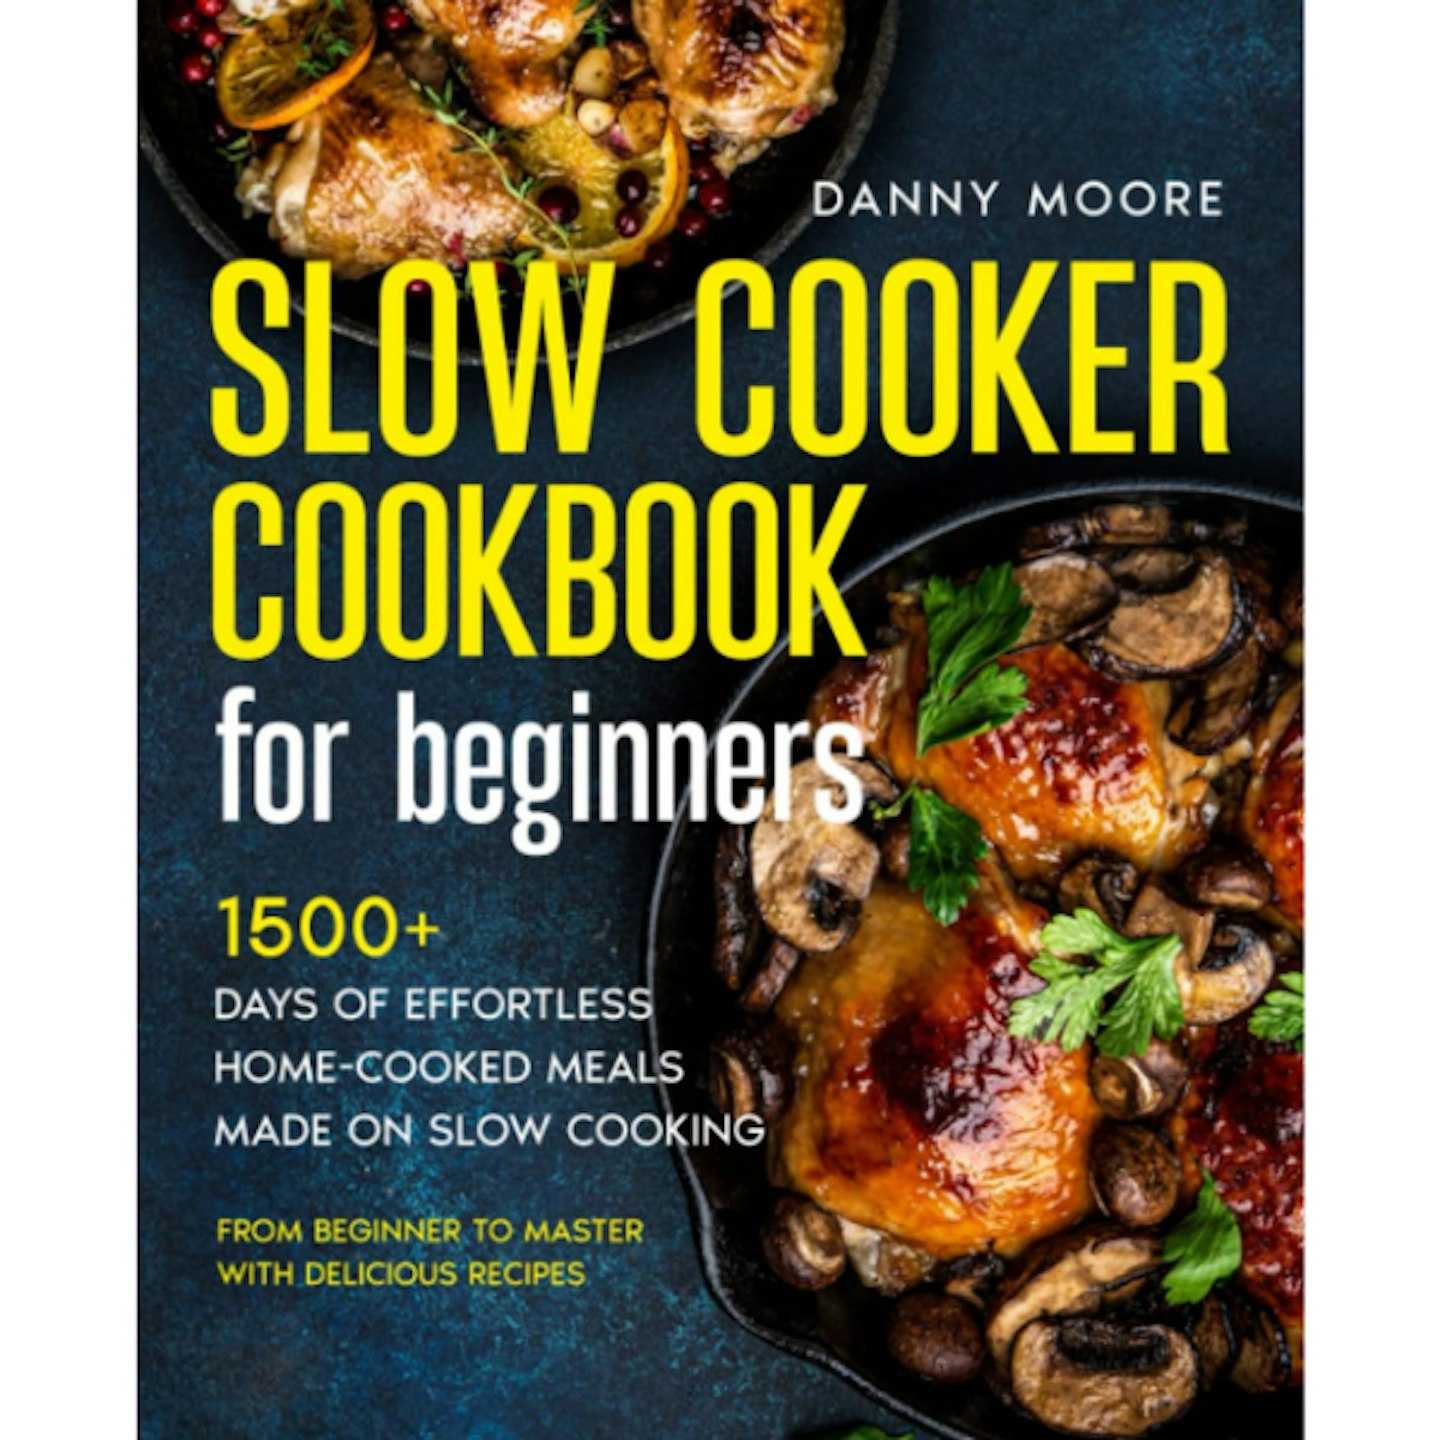 Slow Cooker Cookbook for Beginners: 1500+ Days of Effortless Home-Cooked Meals Made on Slow Cooking